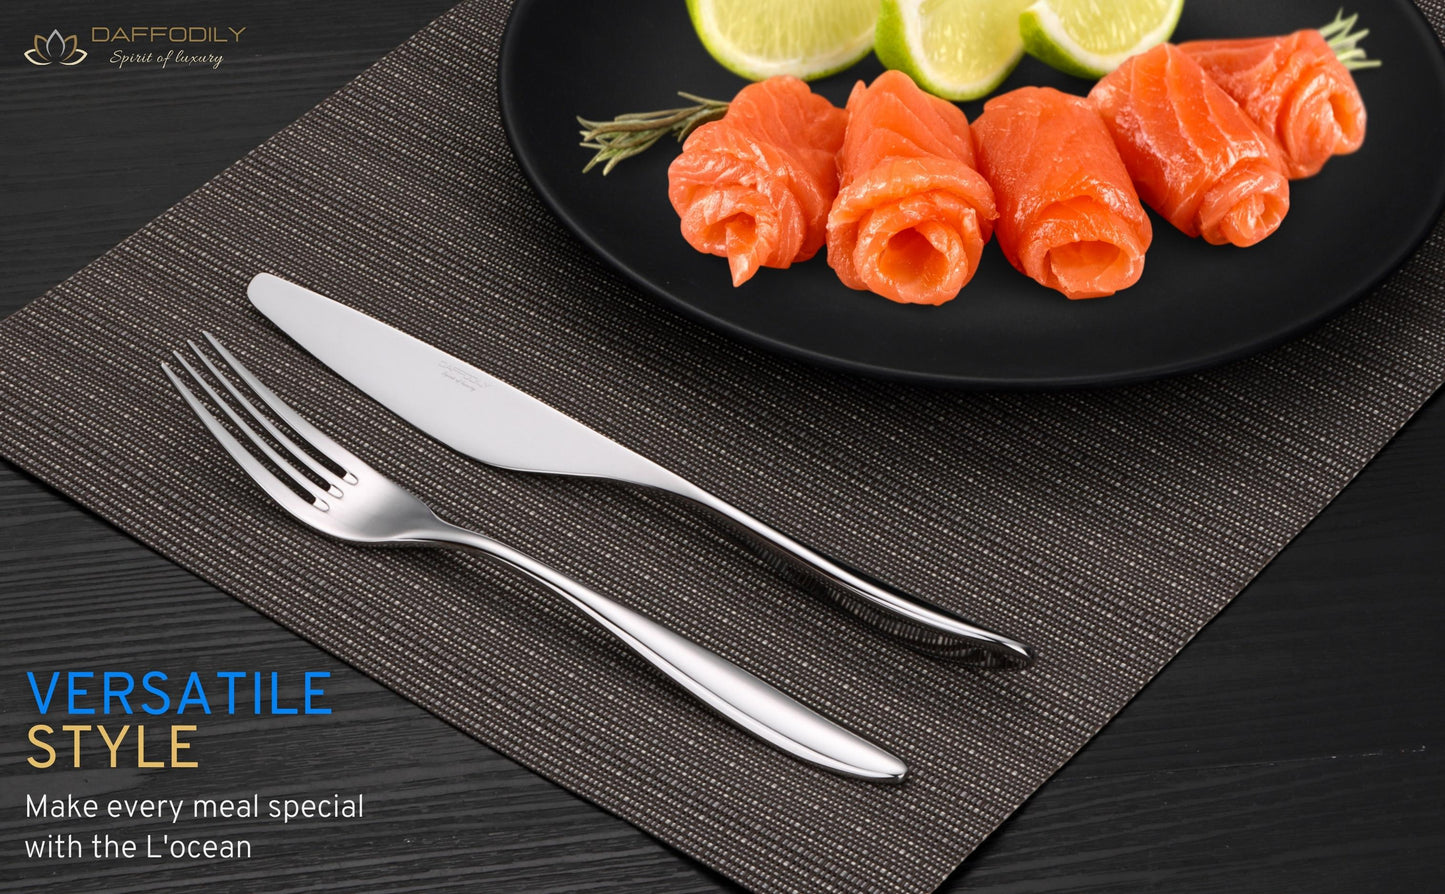 Finely crafted fork, knife, and spoon for an elevated dining experience